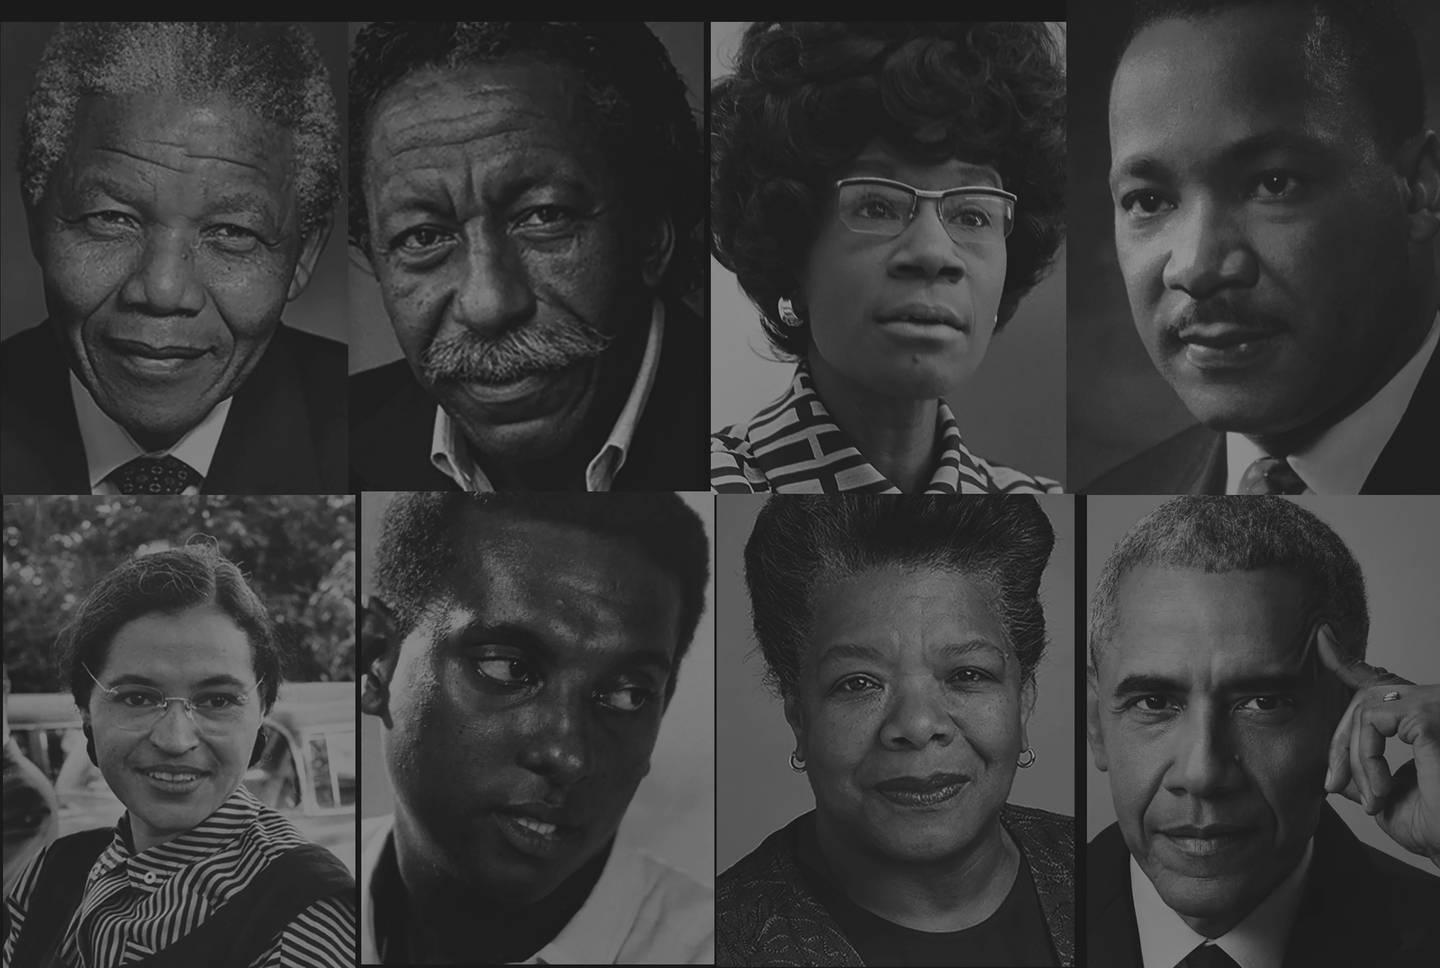 African American Studies Program can prepare students for careers in culture, diversity.  (Clockwise from top left) Nelson Mandela, Gordon Parks, Chirley Chisholm, Martin Luthur King Jr., Barack Obama, Maya Angelou, Stokely Charmichael and Rosa Parks.